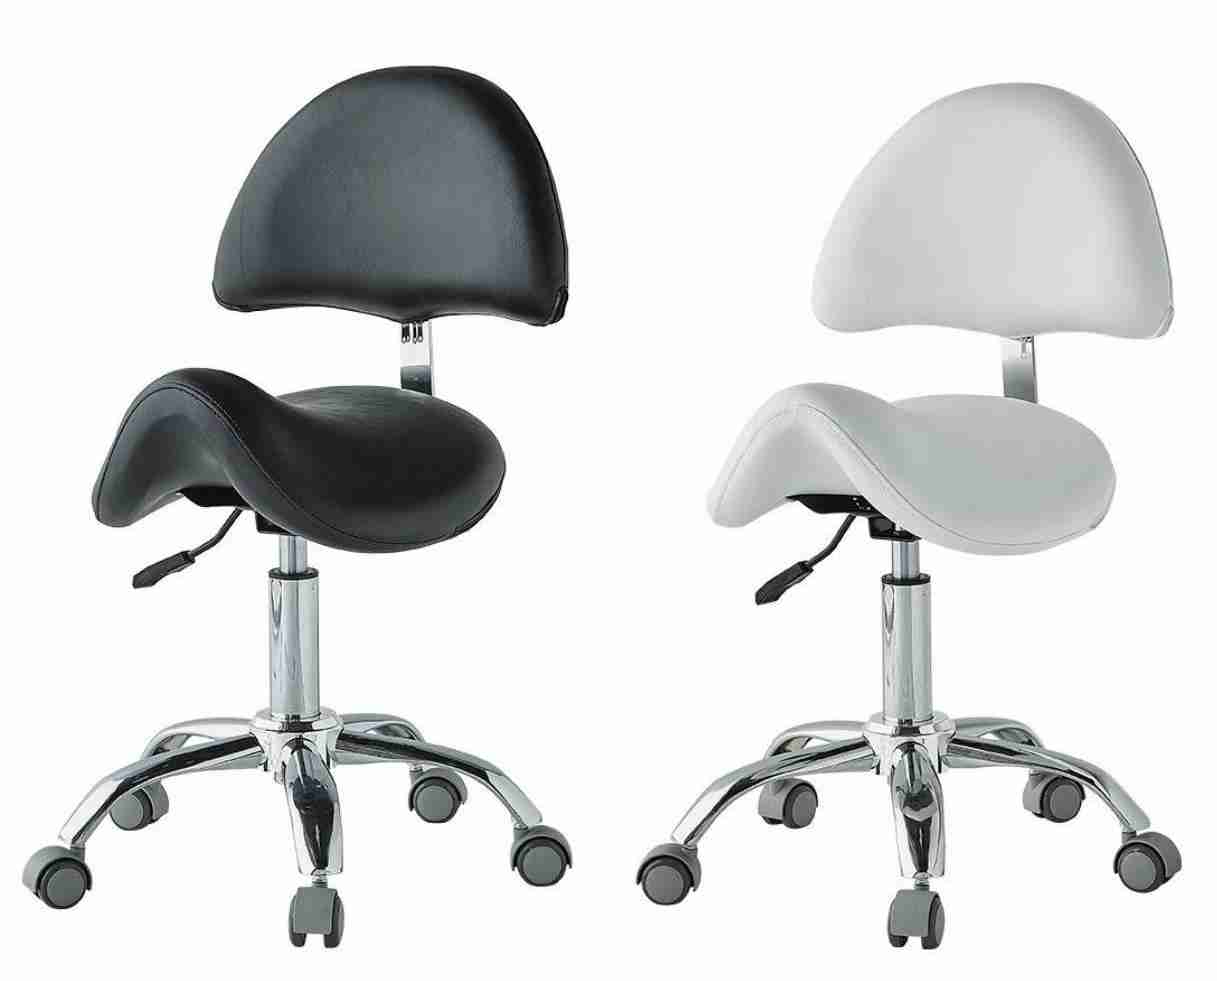 Revolving stool with back support with castors - (#FSHG-A062B)